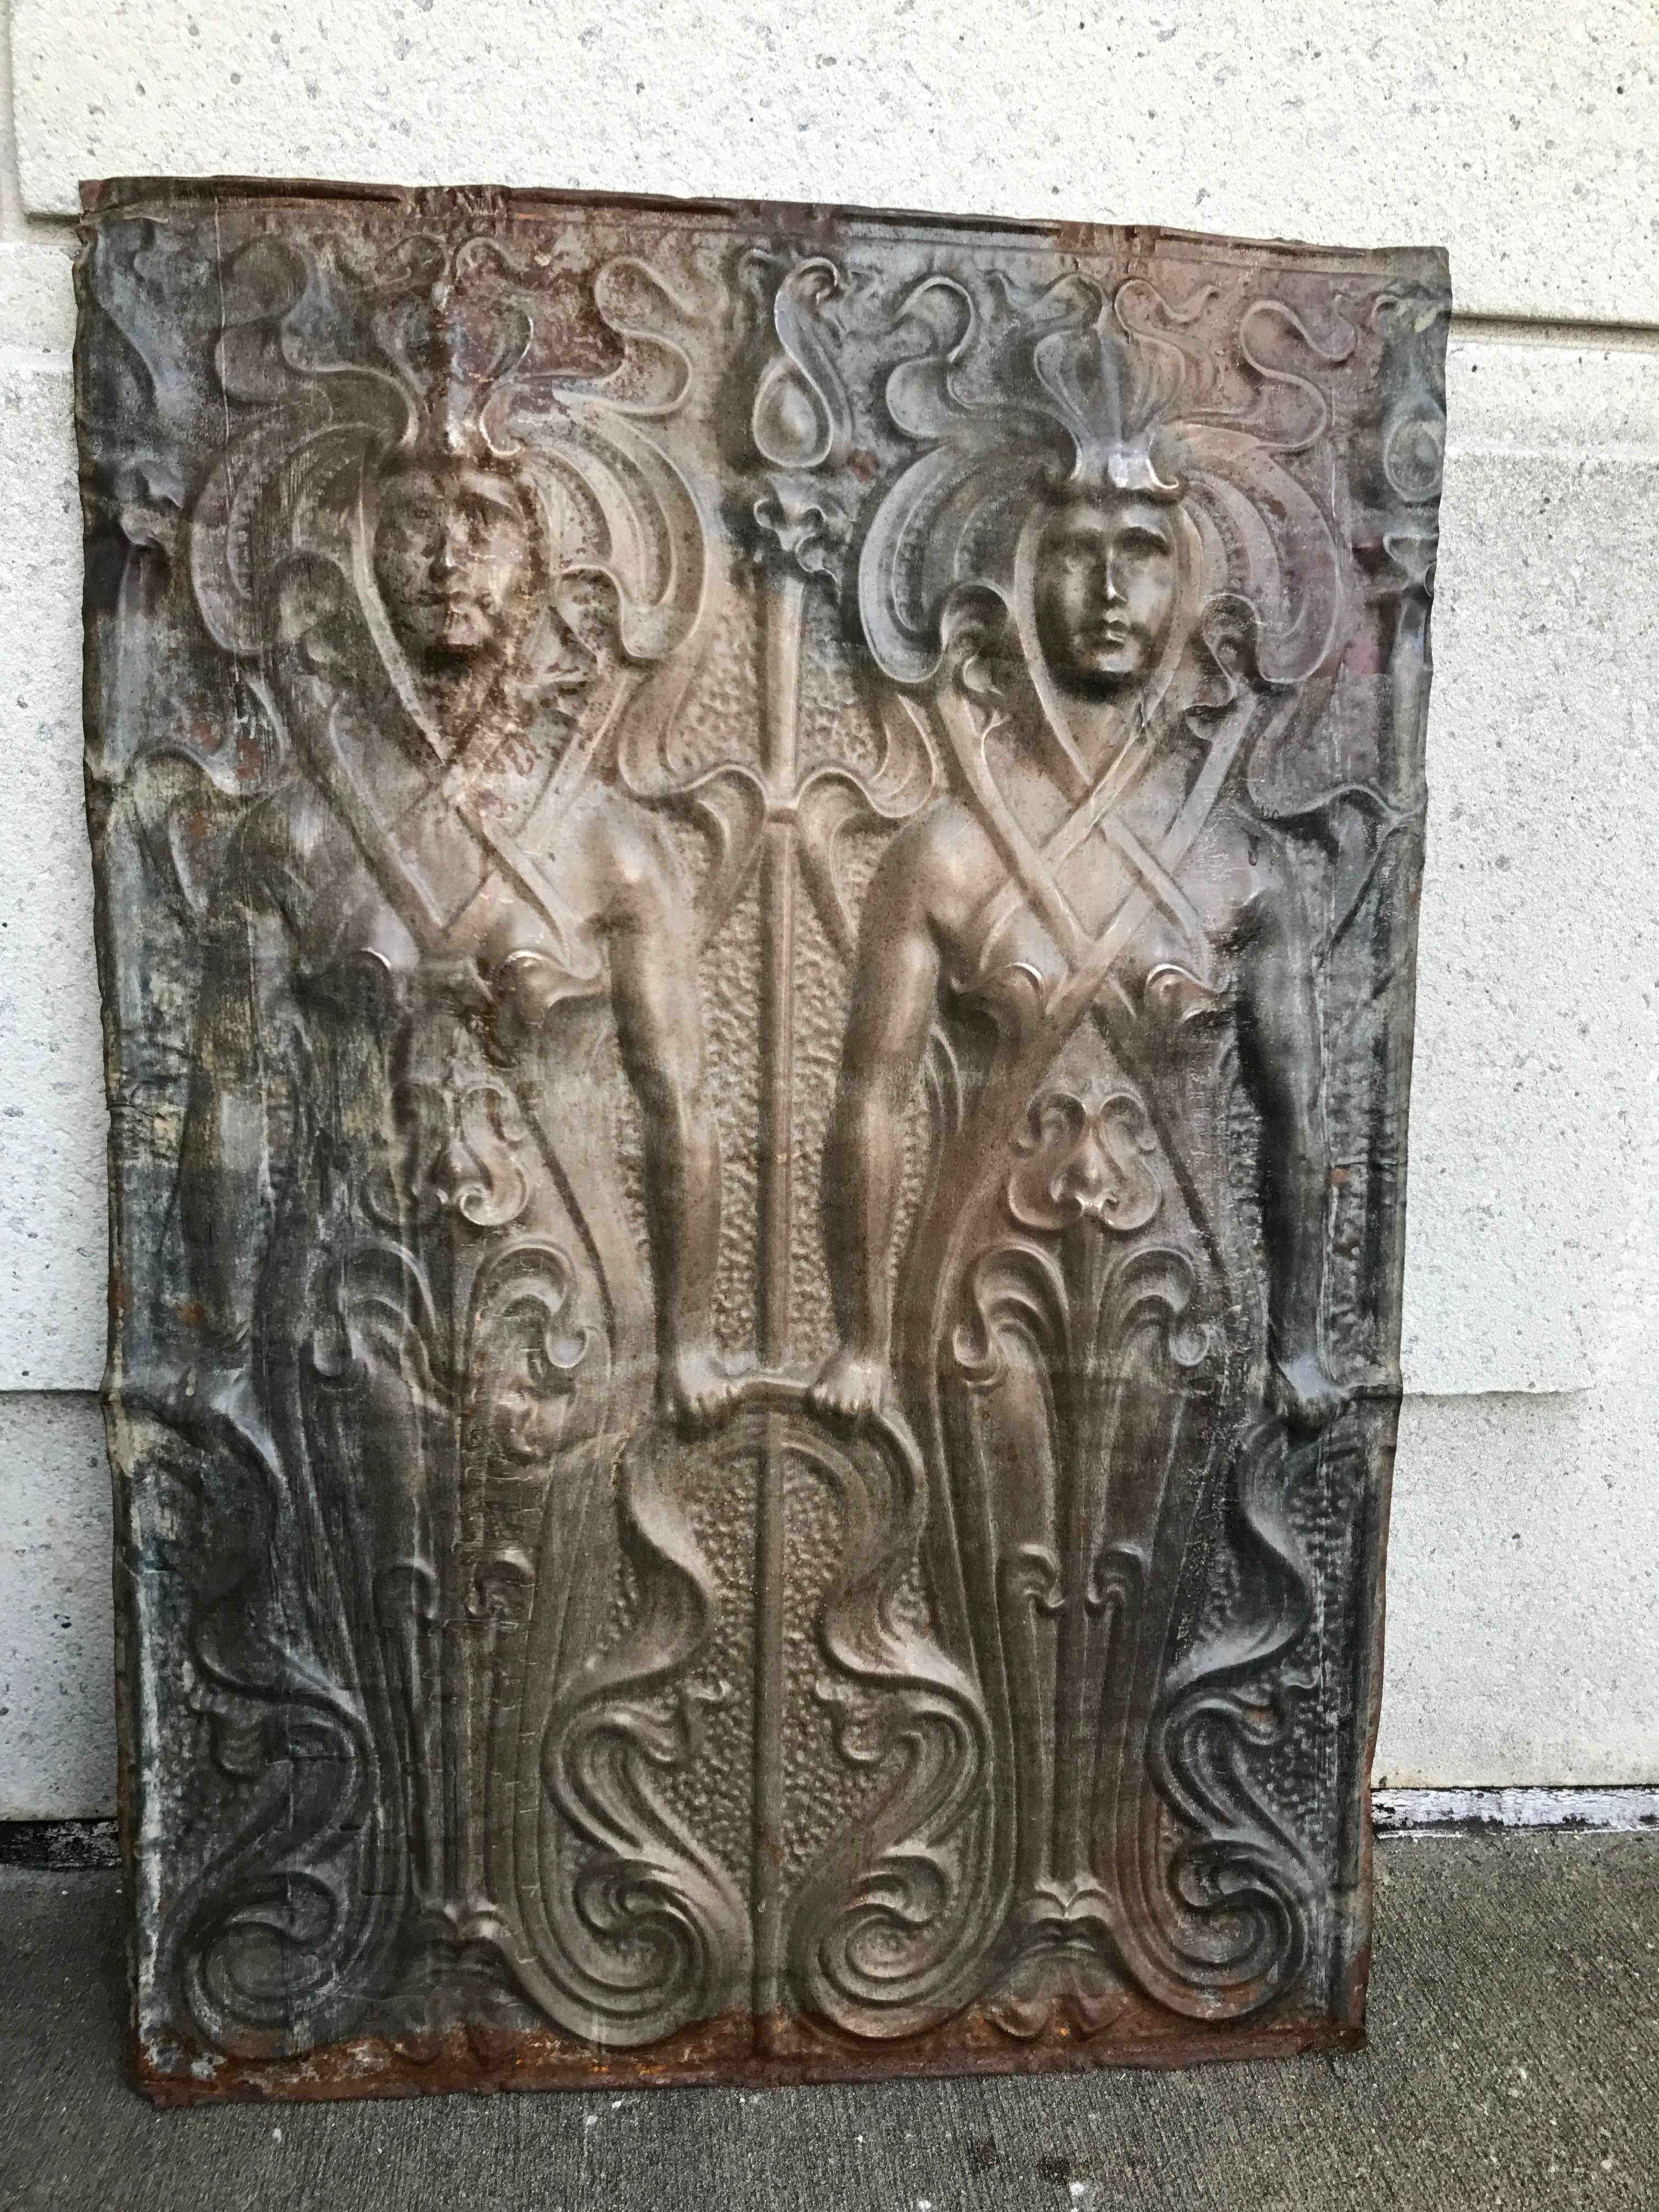 A large scale Austrian zinc wall panel with two female figures in relief. While clearly a wonderful example of Art Nouveau at it's peak these figures look ahead to German Expressionism, bringing to mind the female robot in Fritz Lang's 'Metropolis'.